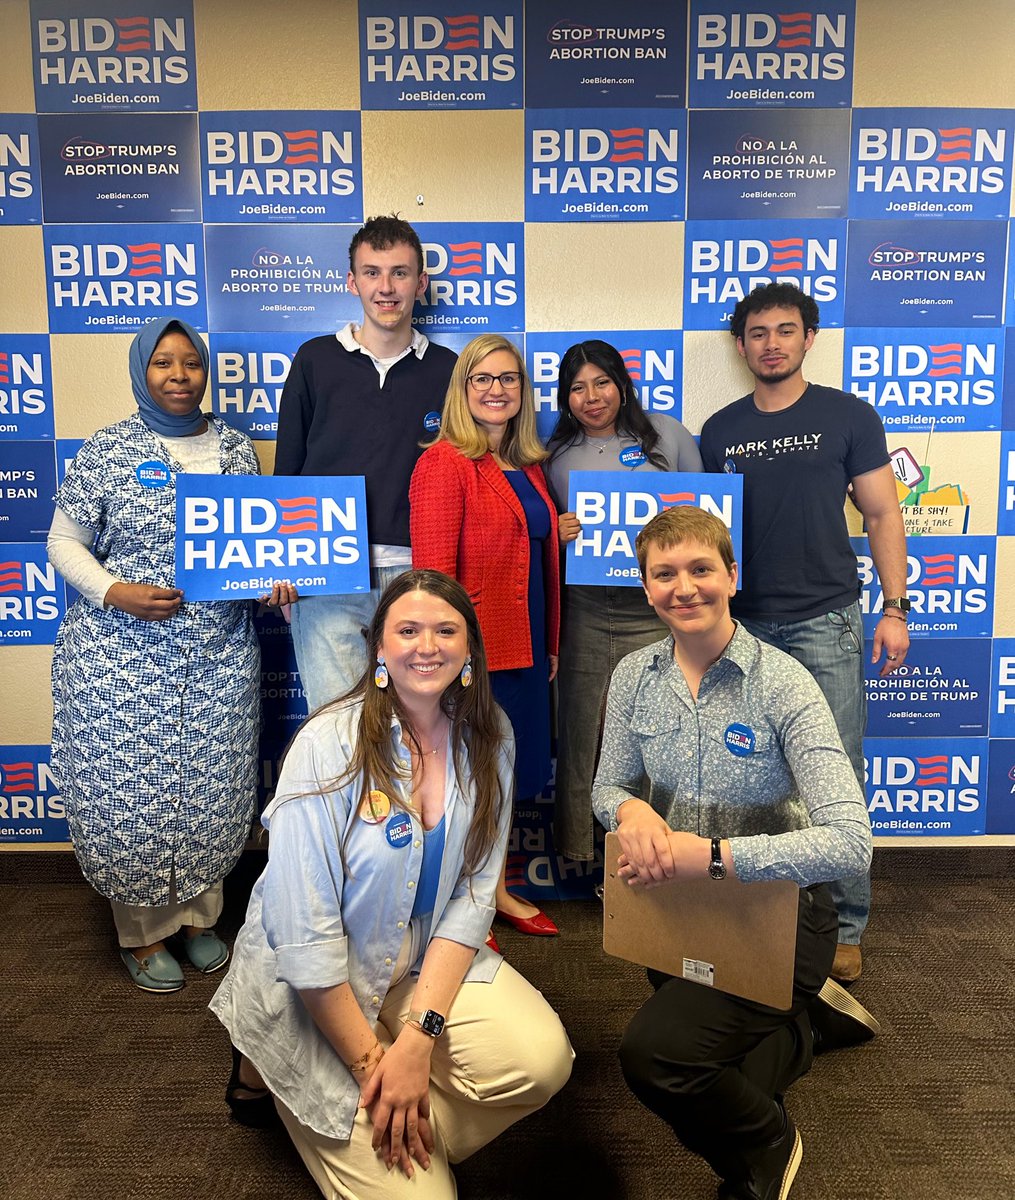 The @azdemparty Midtown office is now officially open and ready to help reelect @JoeBiden & @KamalaHarris!